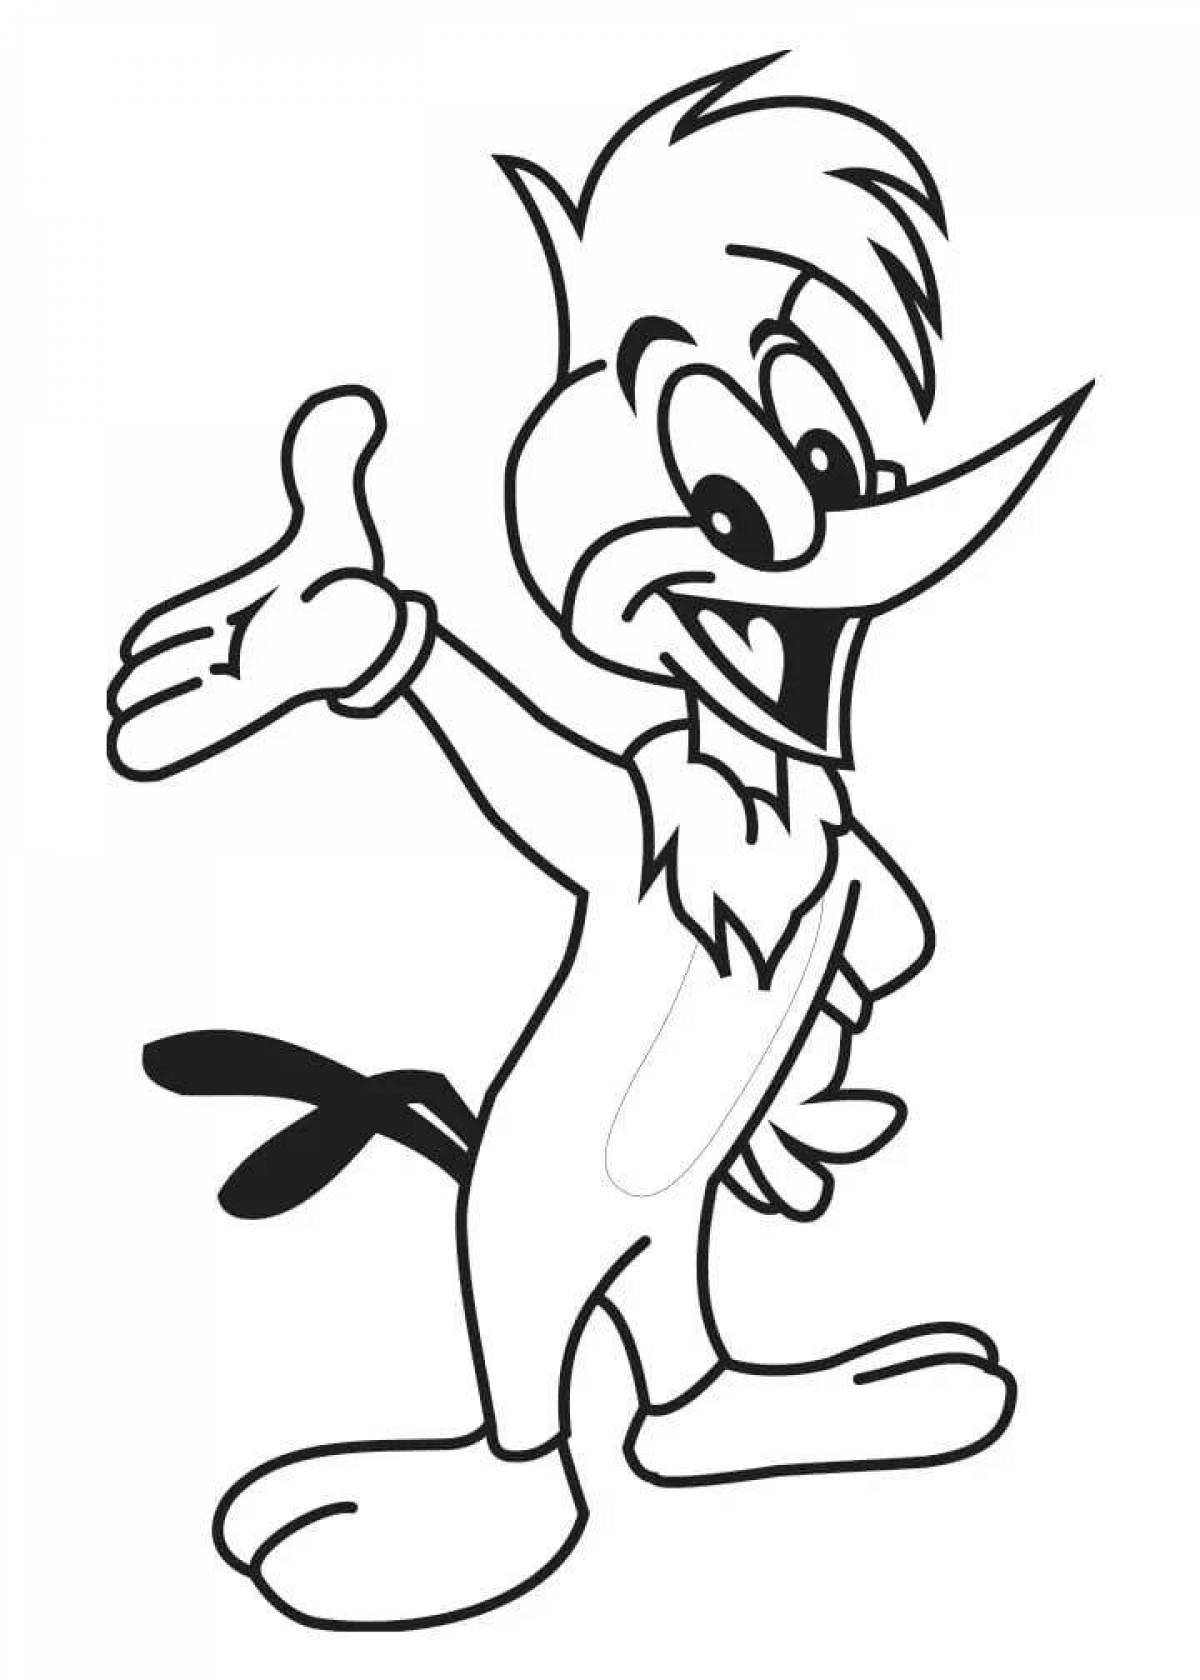 Woody woodpecker coloring book